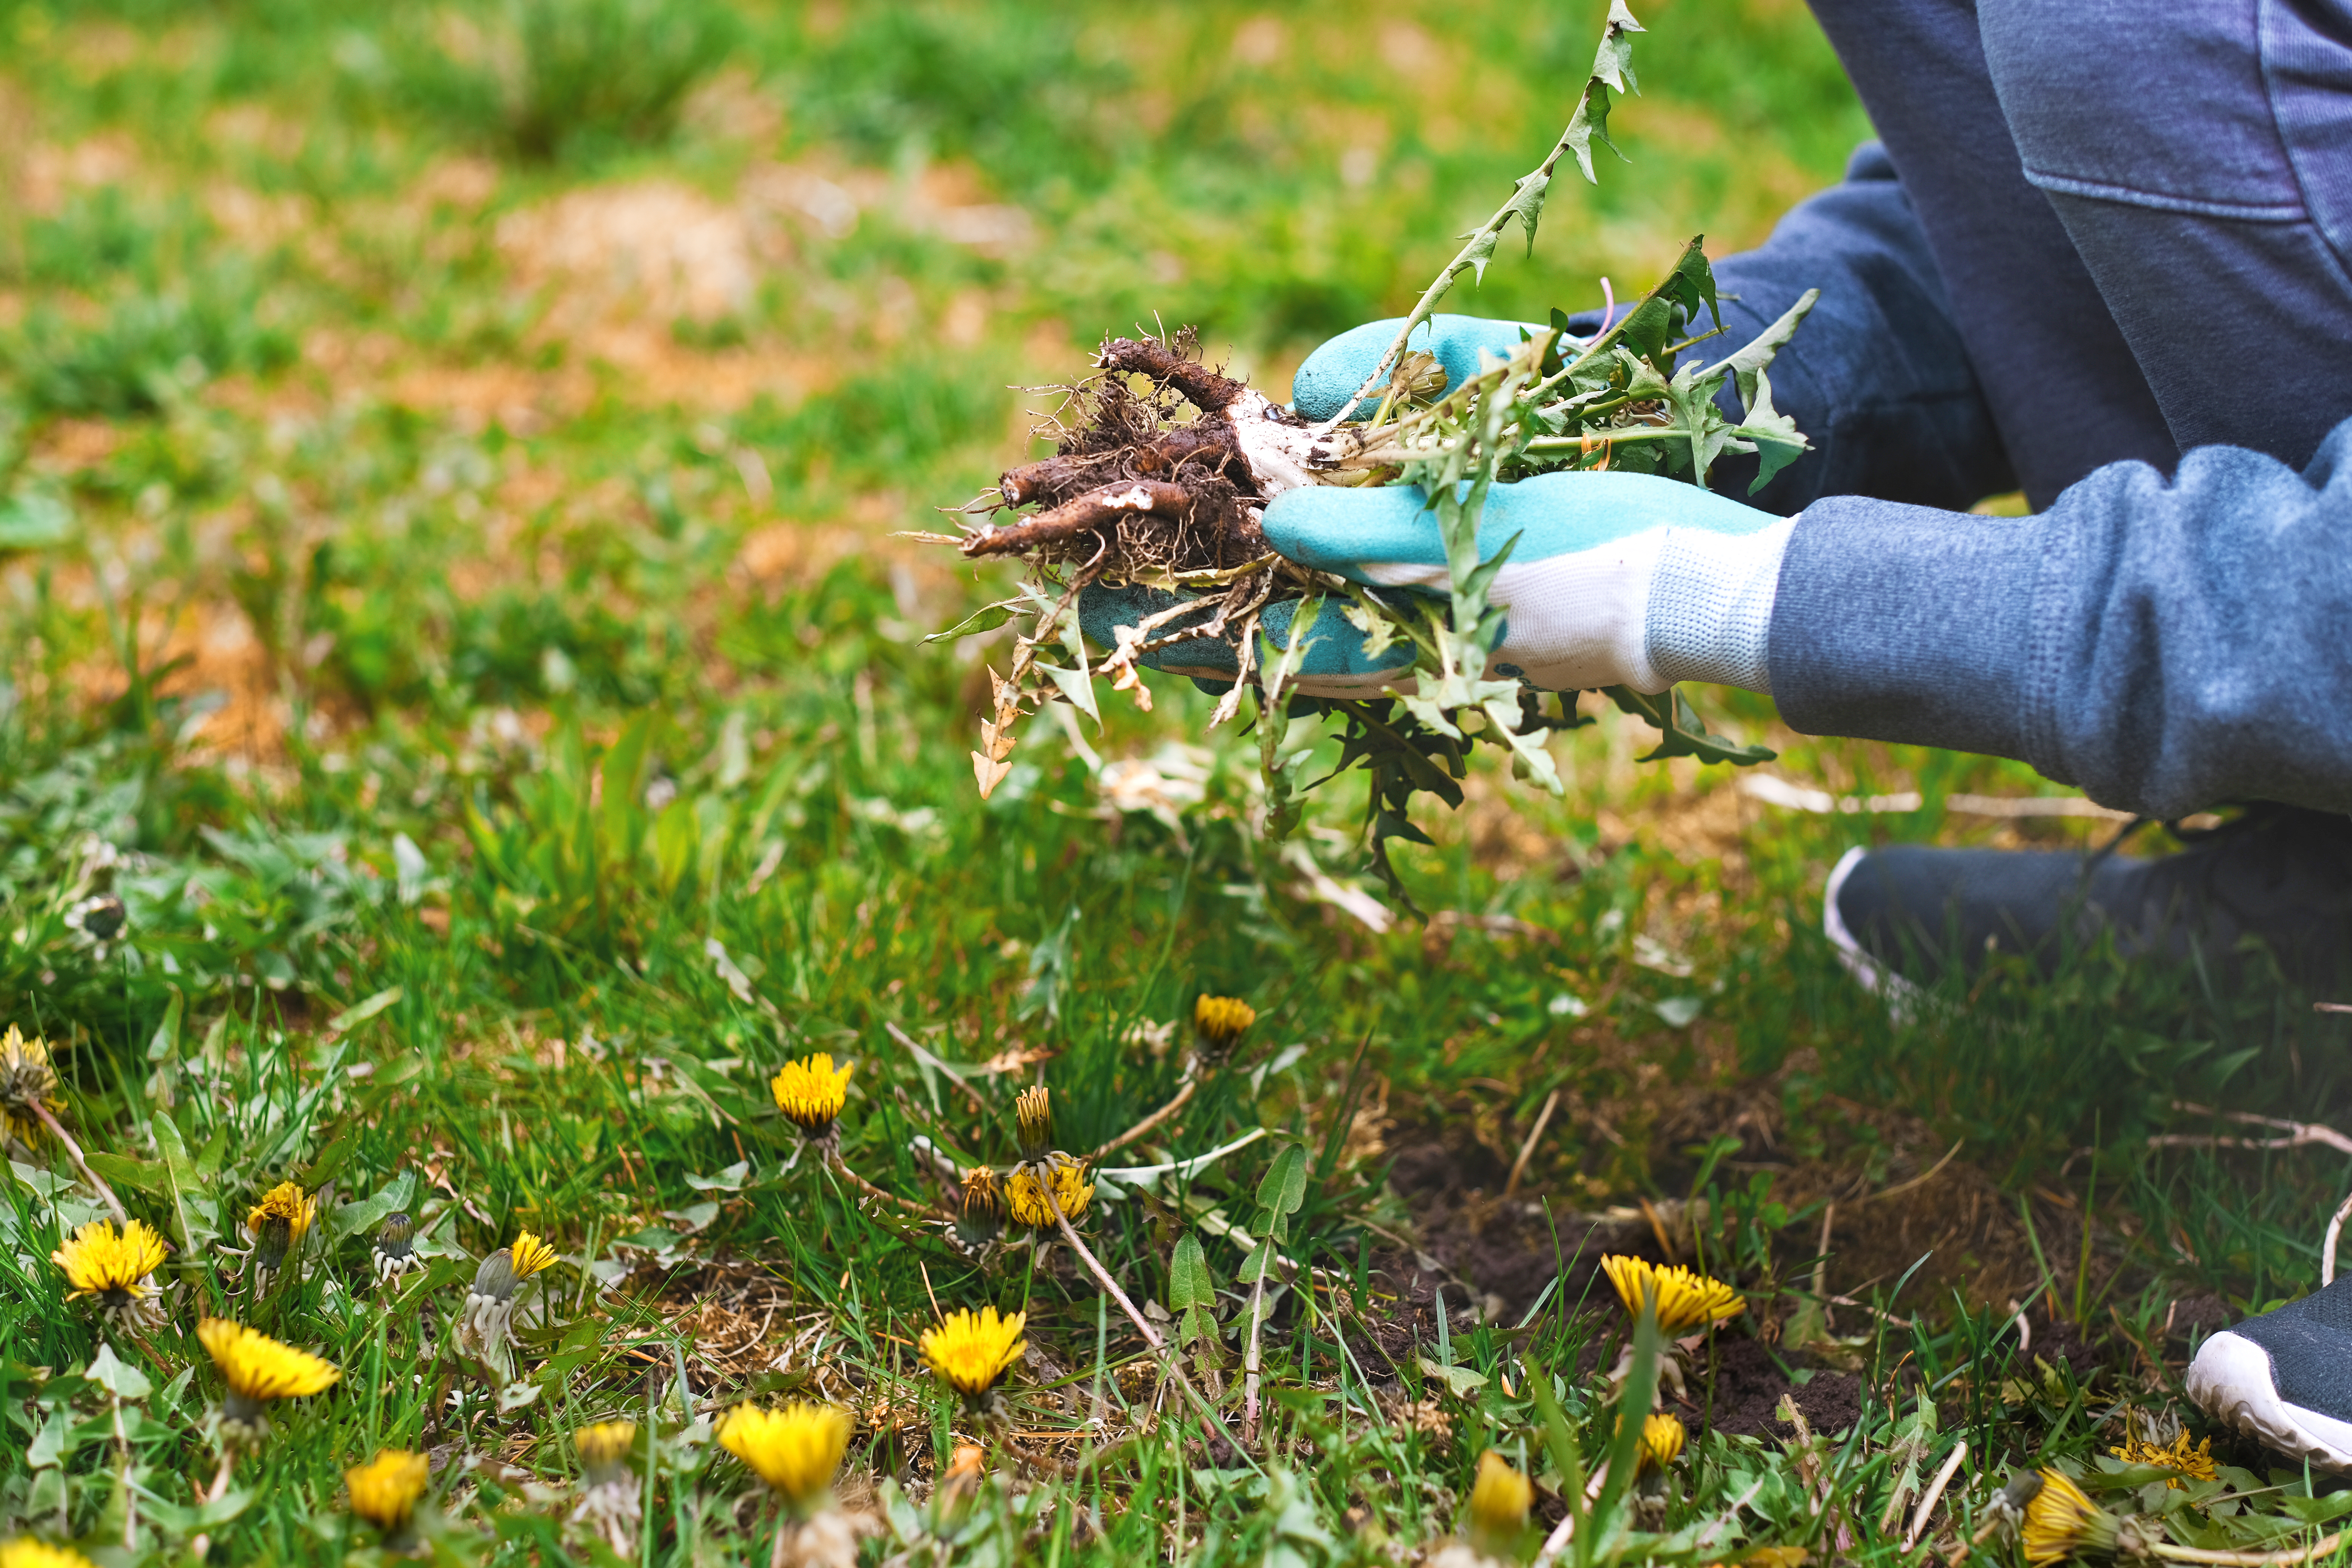 Close-up of a person's hand firmly grasping and uprooting weeds from the soil.